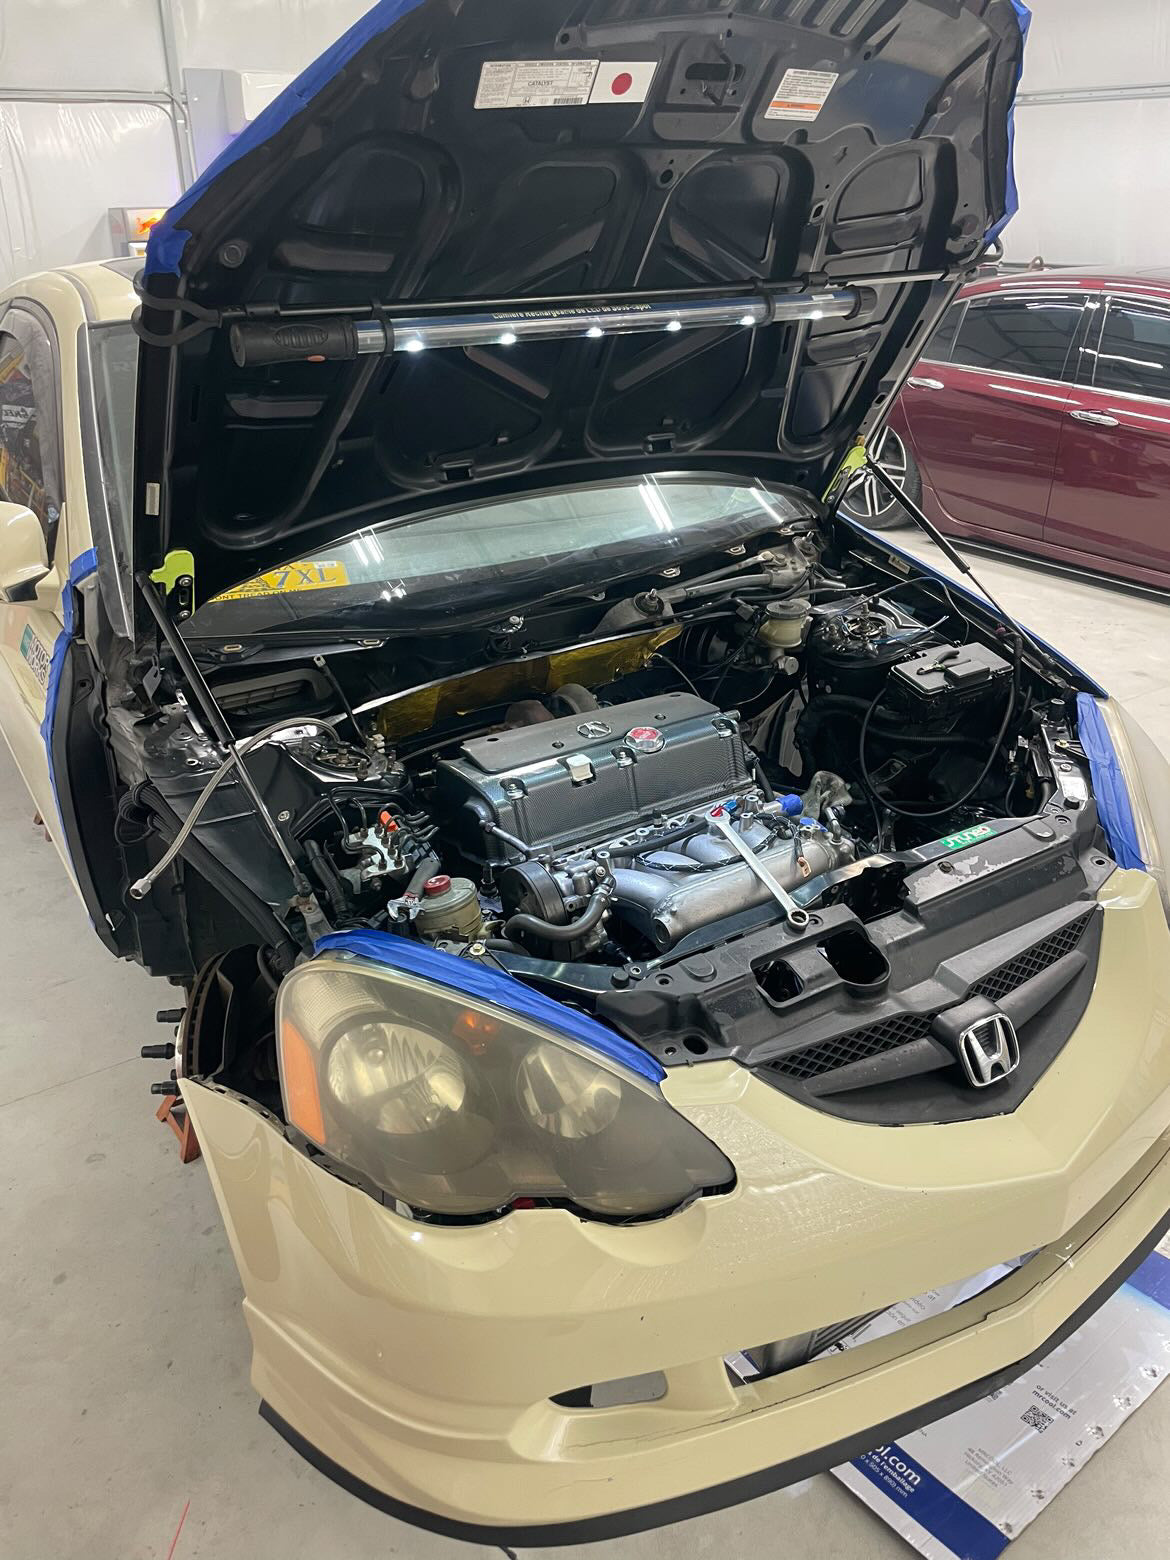 RSX BATTERY RELOCATION KIT